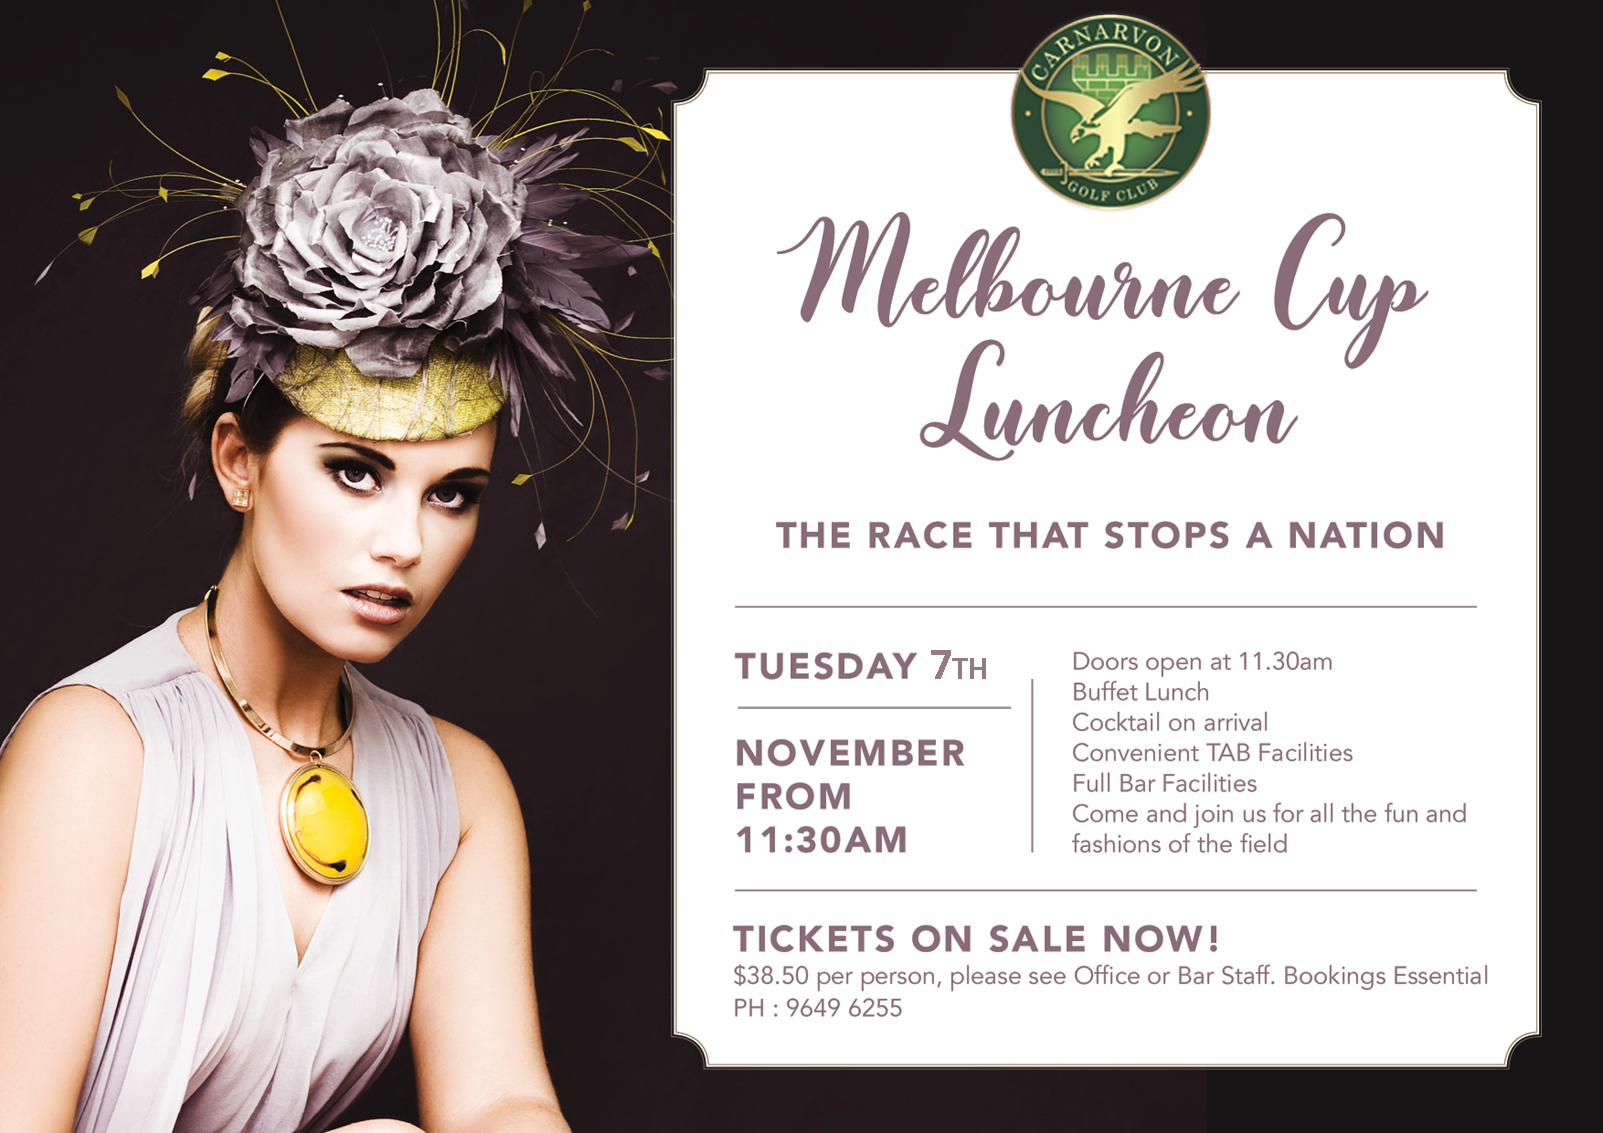 Join Us for our Melbourne Cup Luncheon